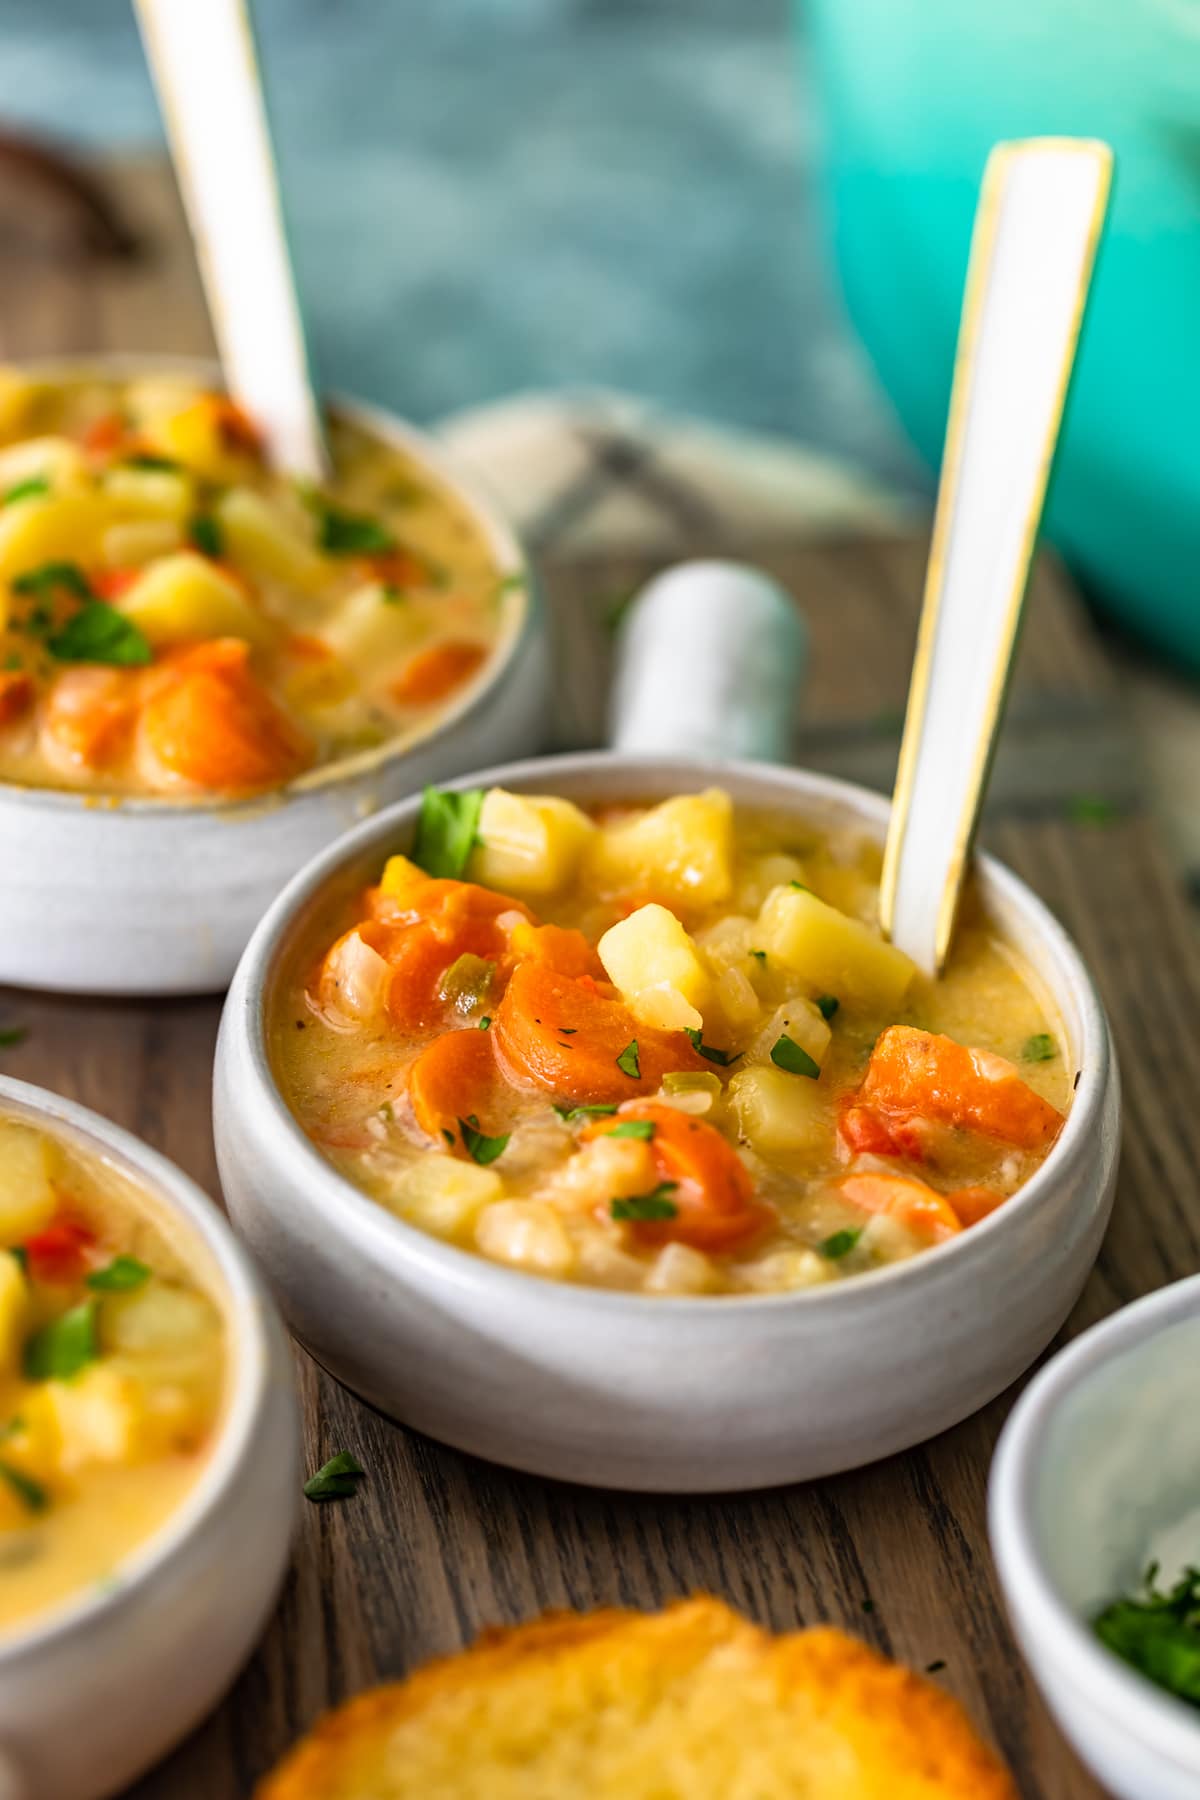 bowls of cheesy soup with vegetables and potatoes